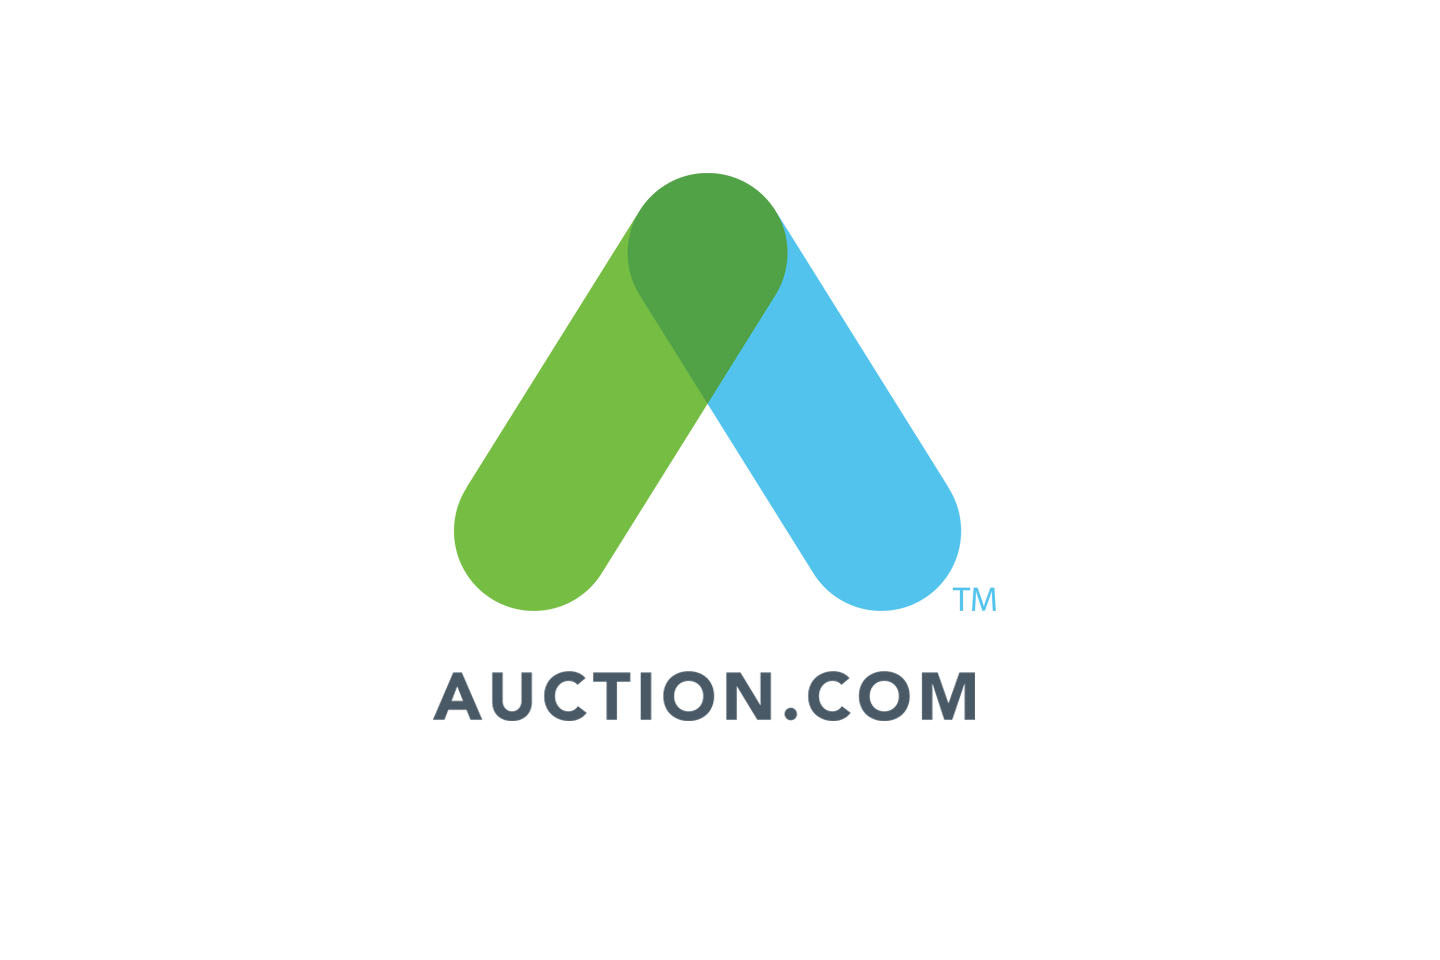 Auction.com new corporate identity by Blue C creative marketing agency